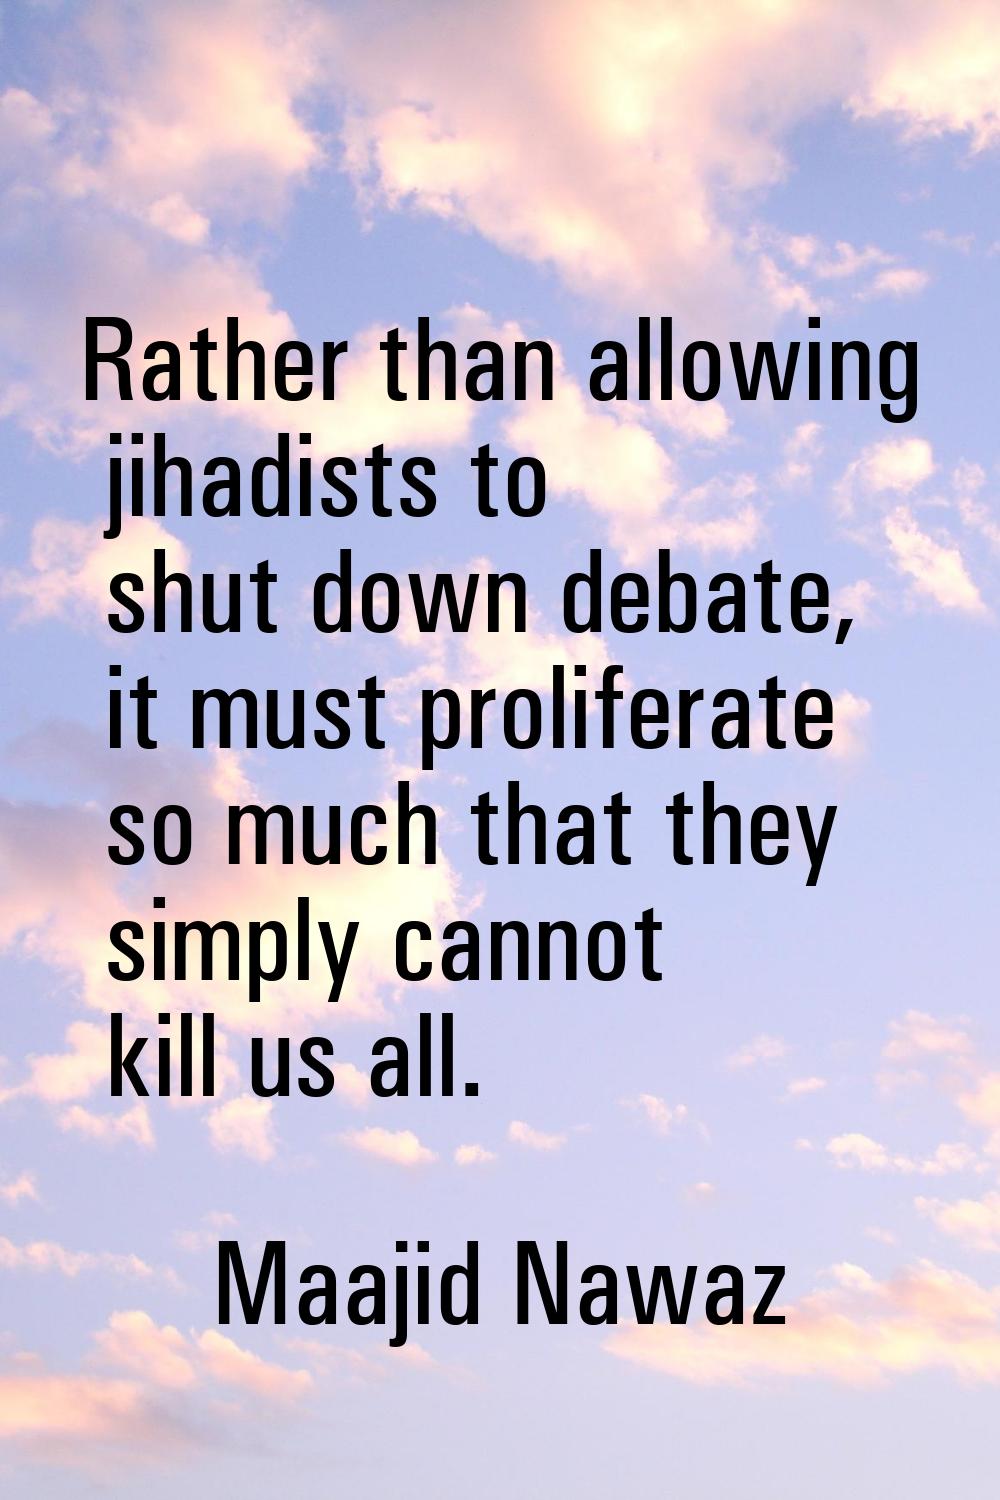 Rather than allowing jihadists to shut down debate, it must proliferate so much that they simply ca